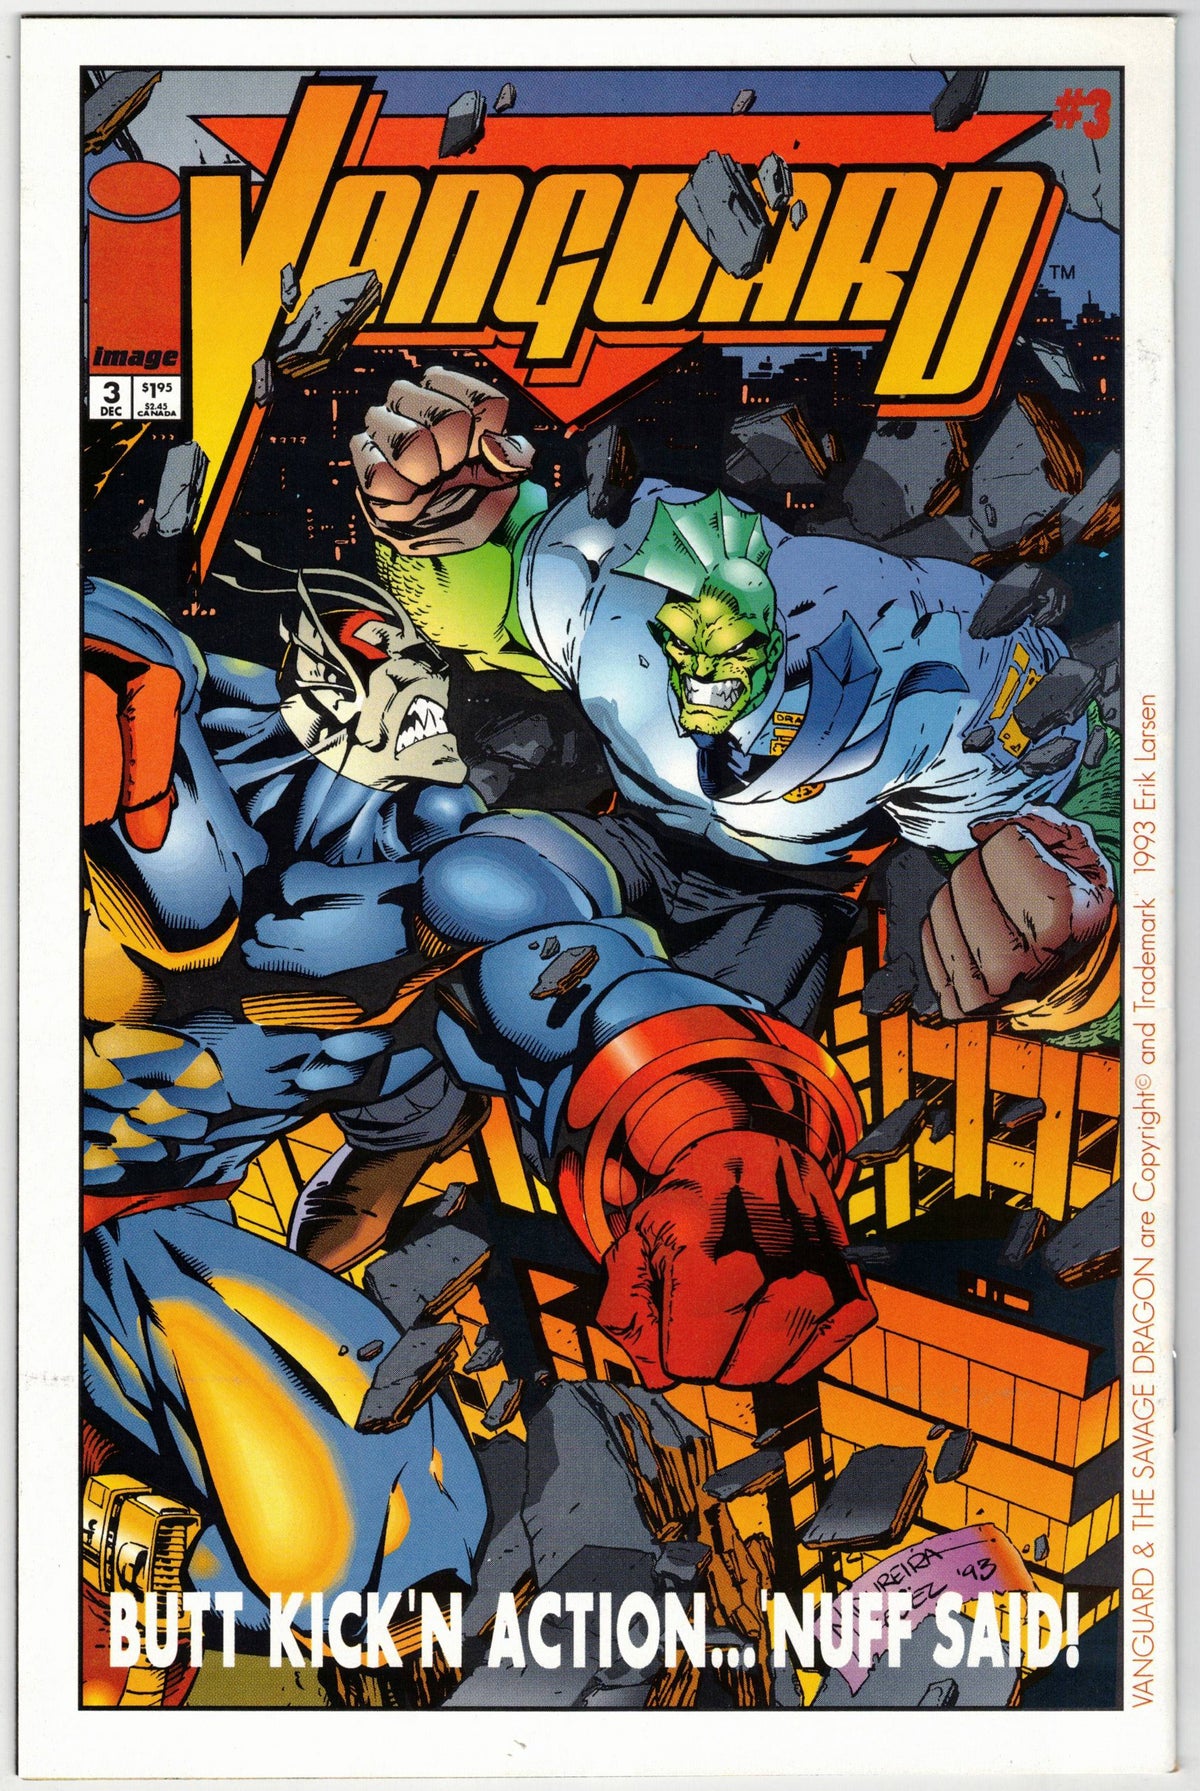 Photo of Superpatriot (1993) Issue 3 - Comic sold by Stronghold Collectibles